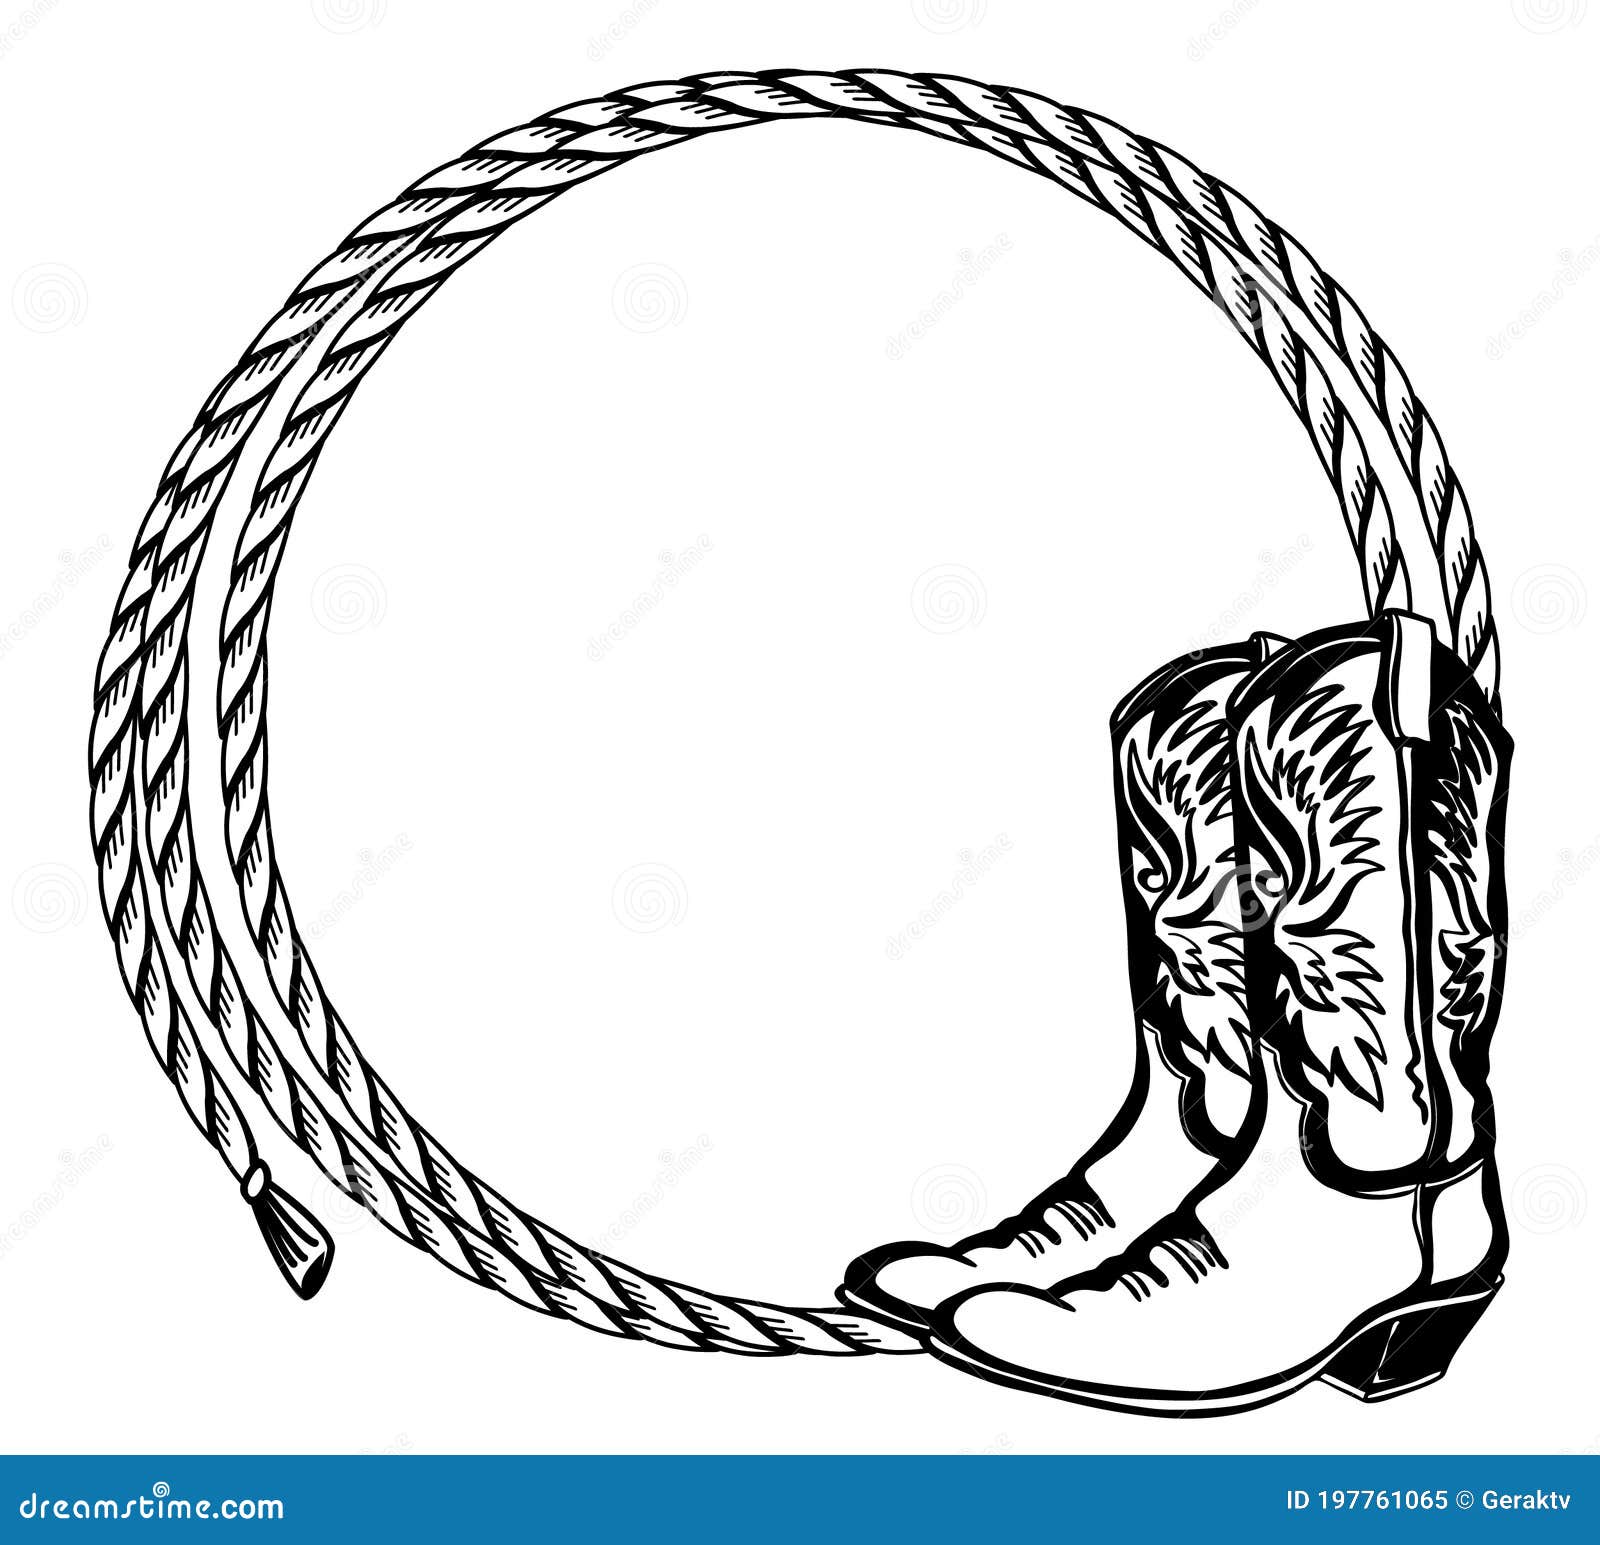 cowboy rope frame with cowboy boots.   cowboy background for text